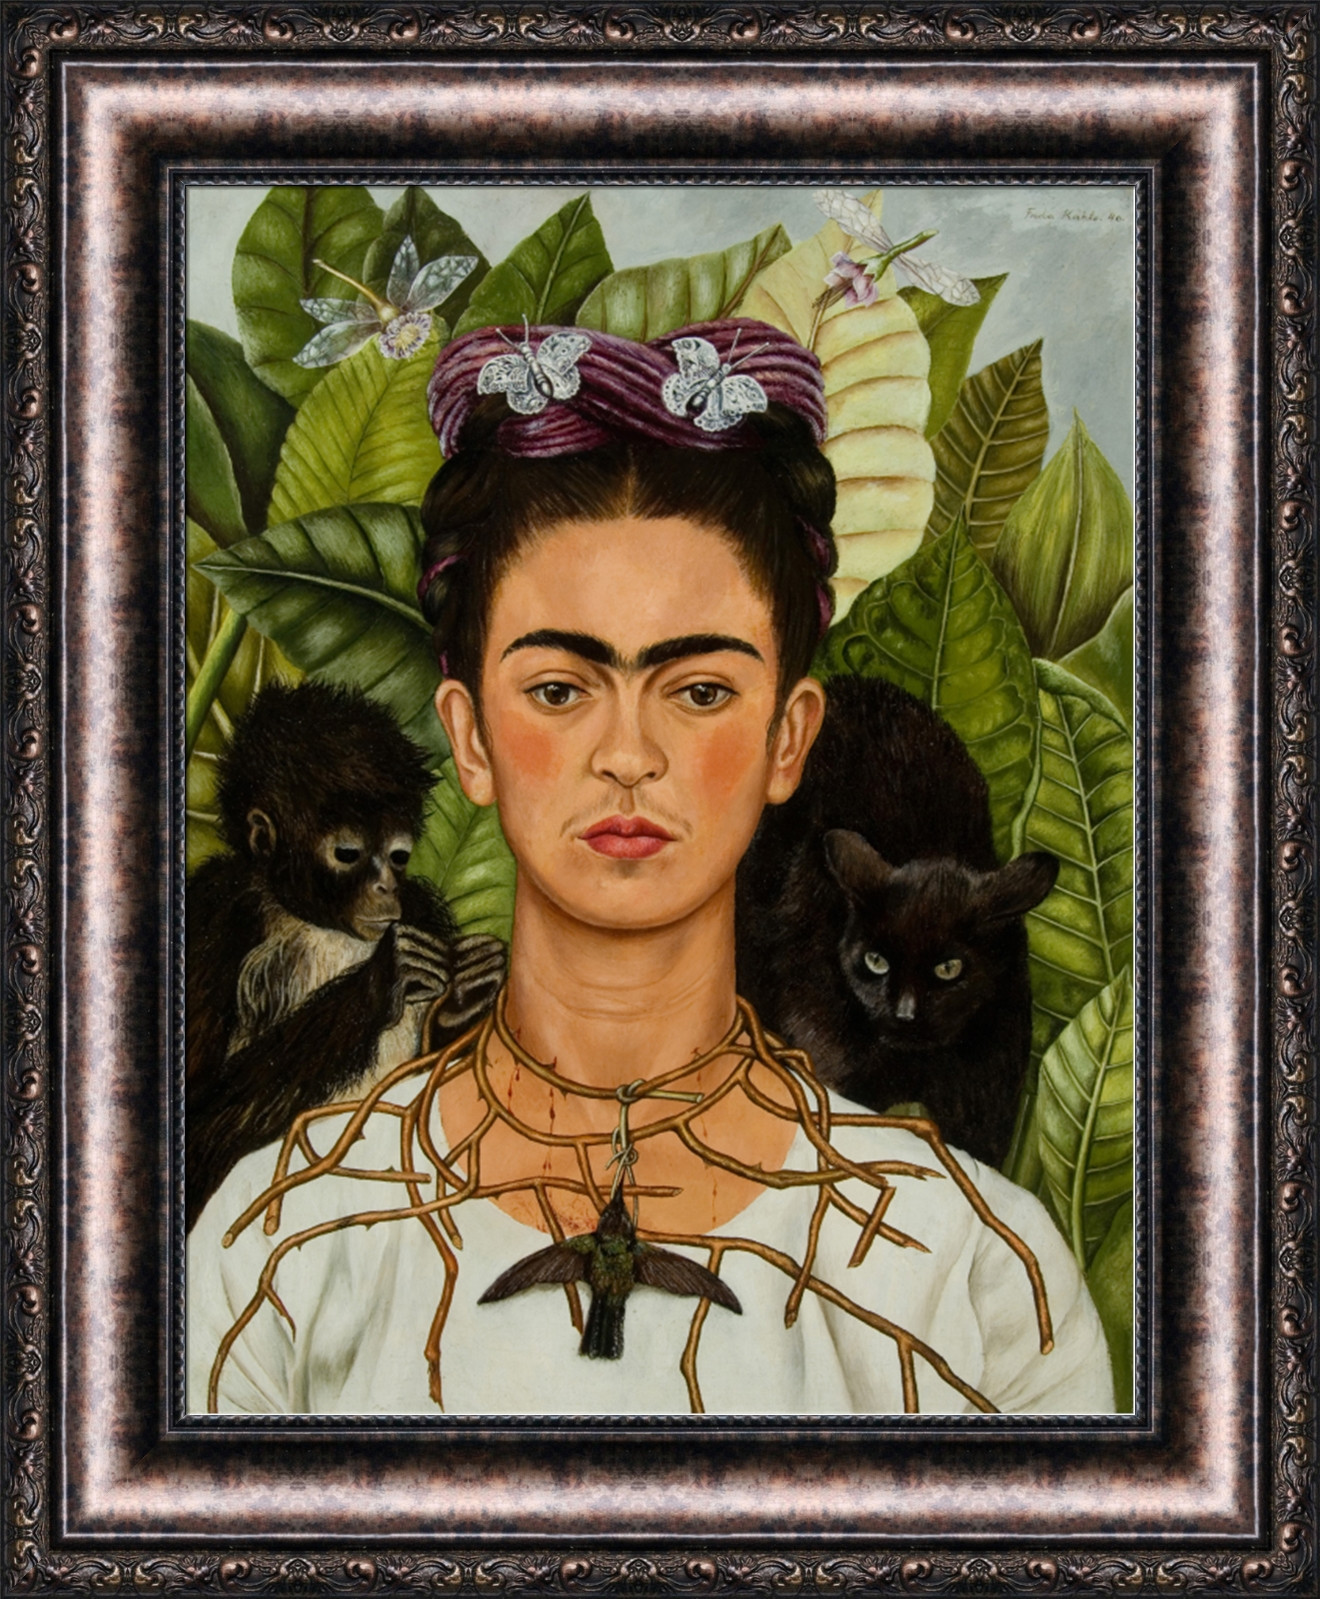 Frida Kahlo Self Portrait With Thorn Necklace And Hummingbird
 Frida Kahlo Self Portrait with Thorn Necklace and